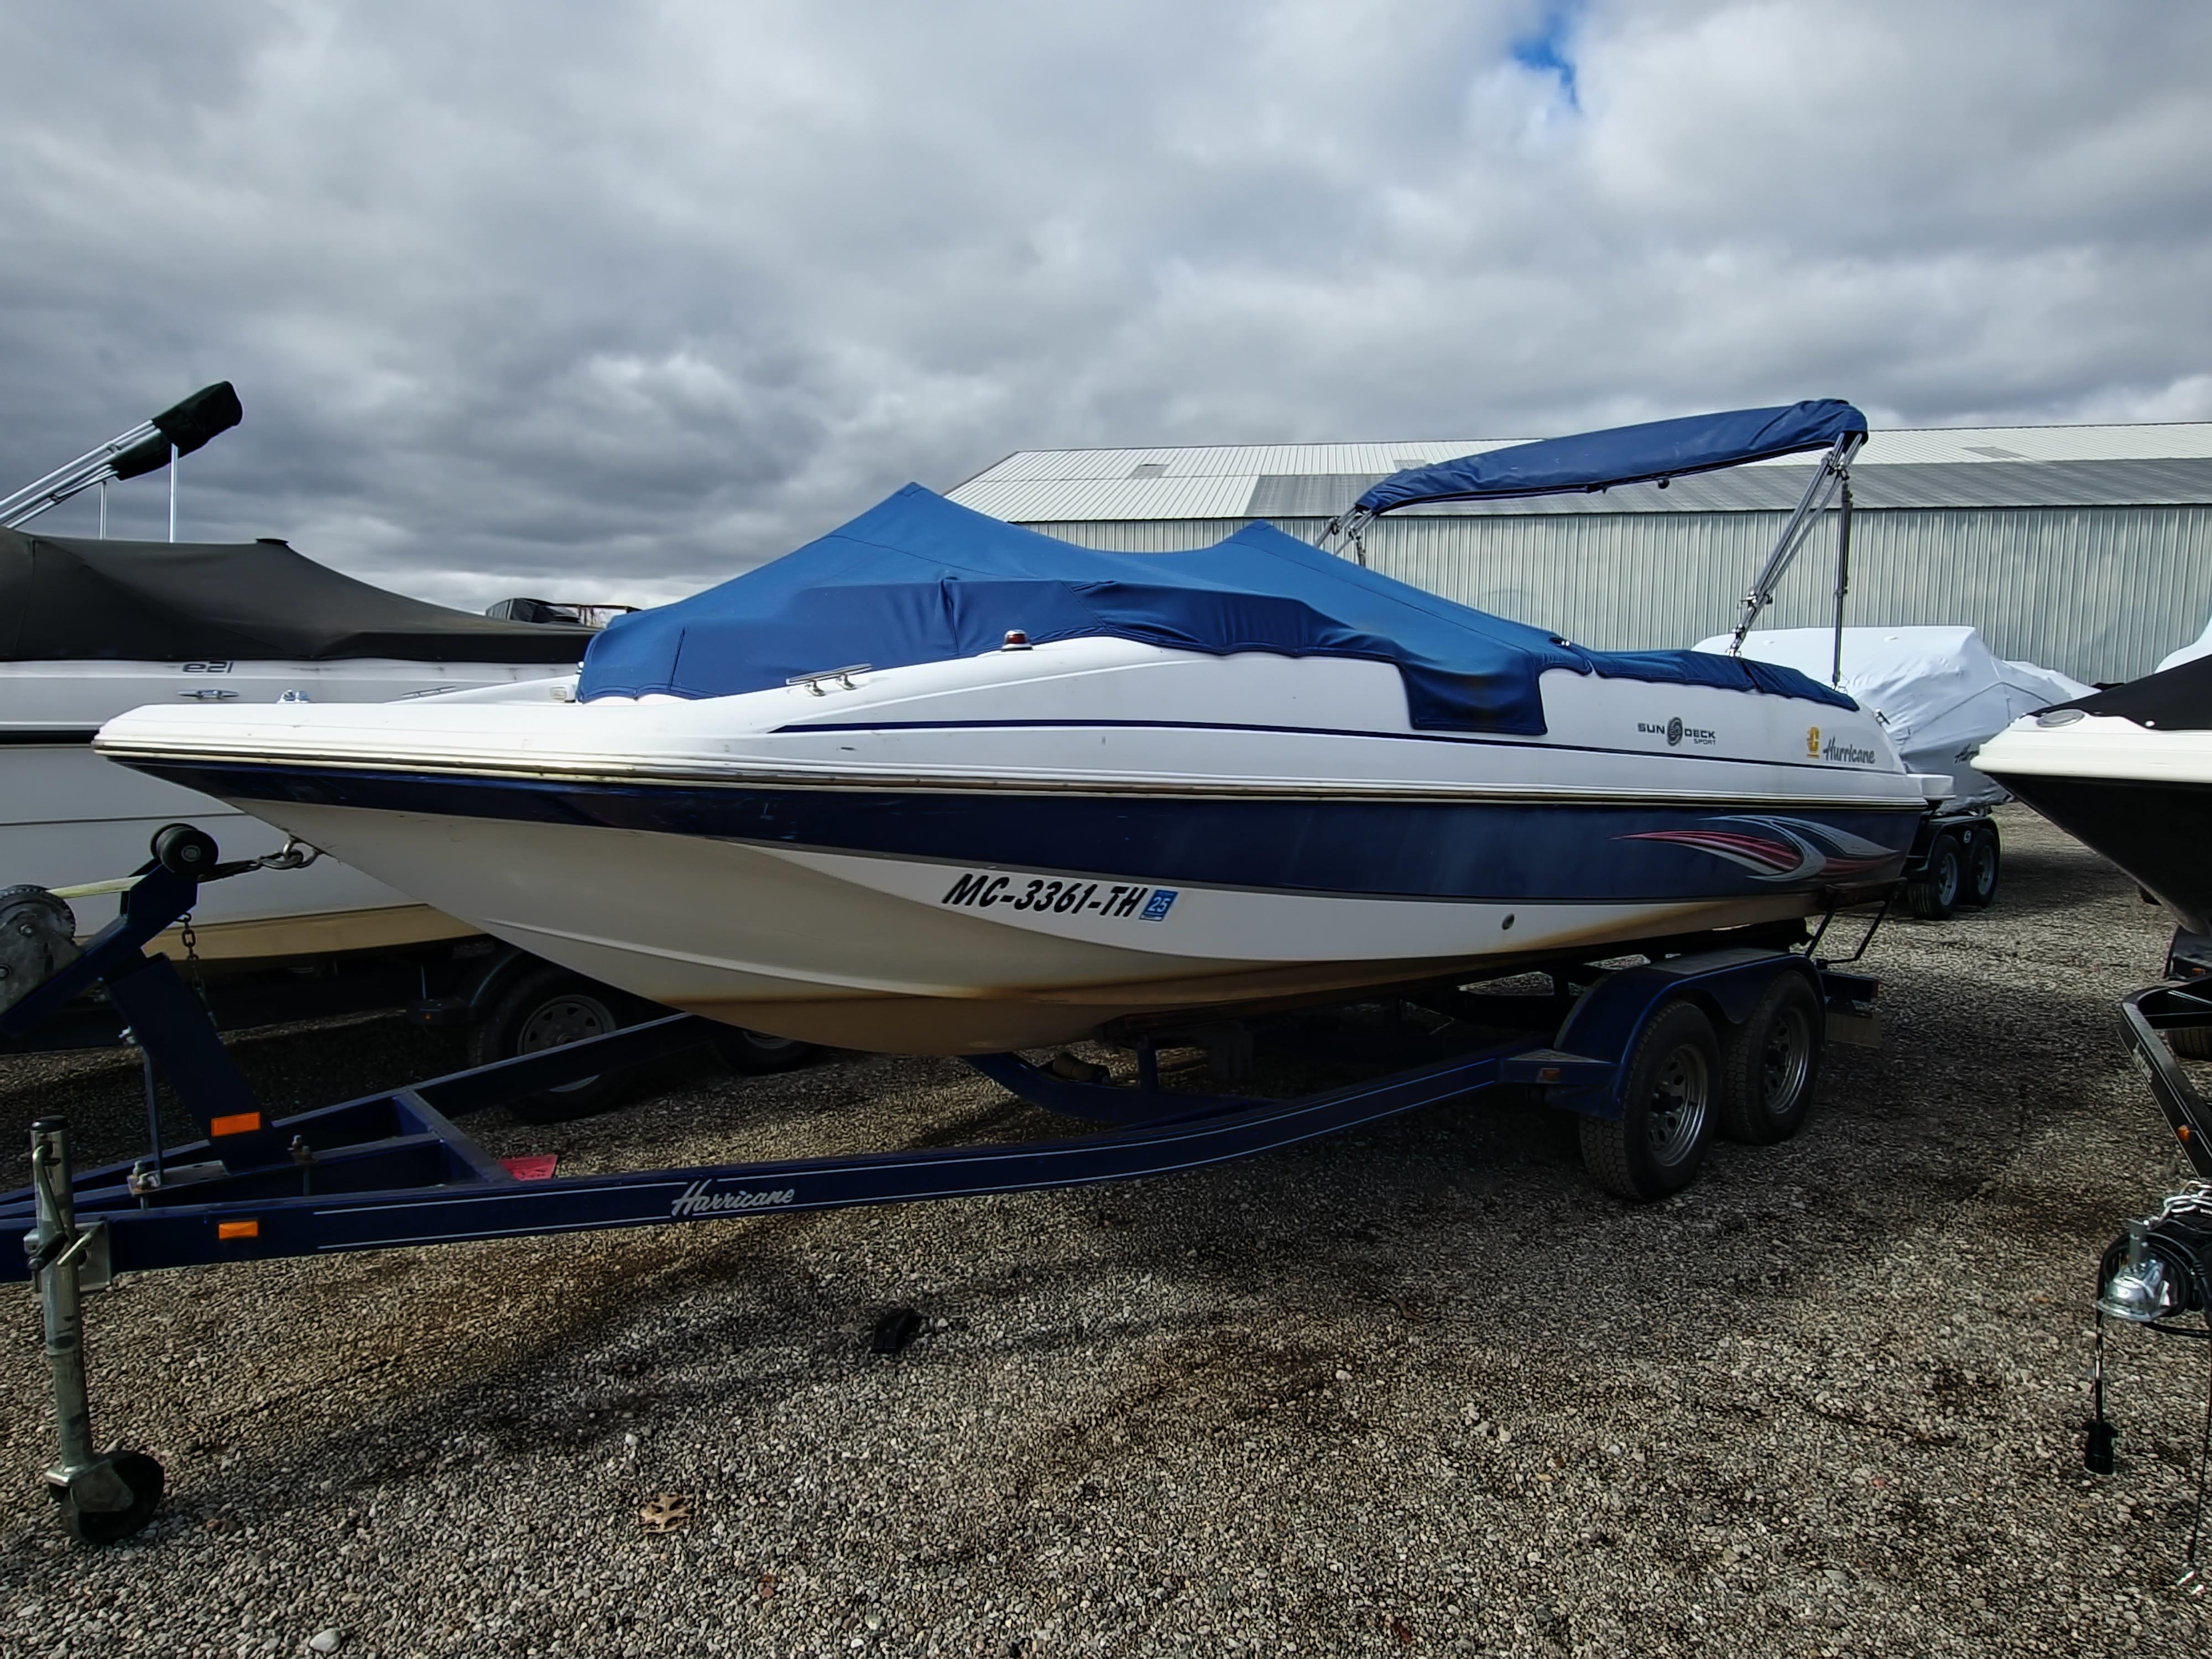 Hurricane boats for sale in Howell - Boat Trader